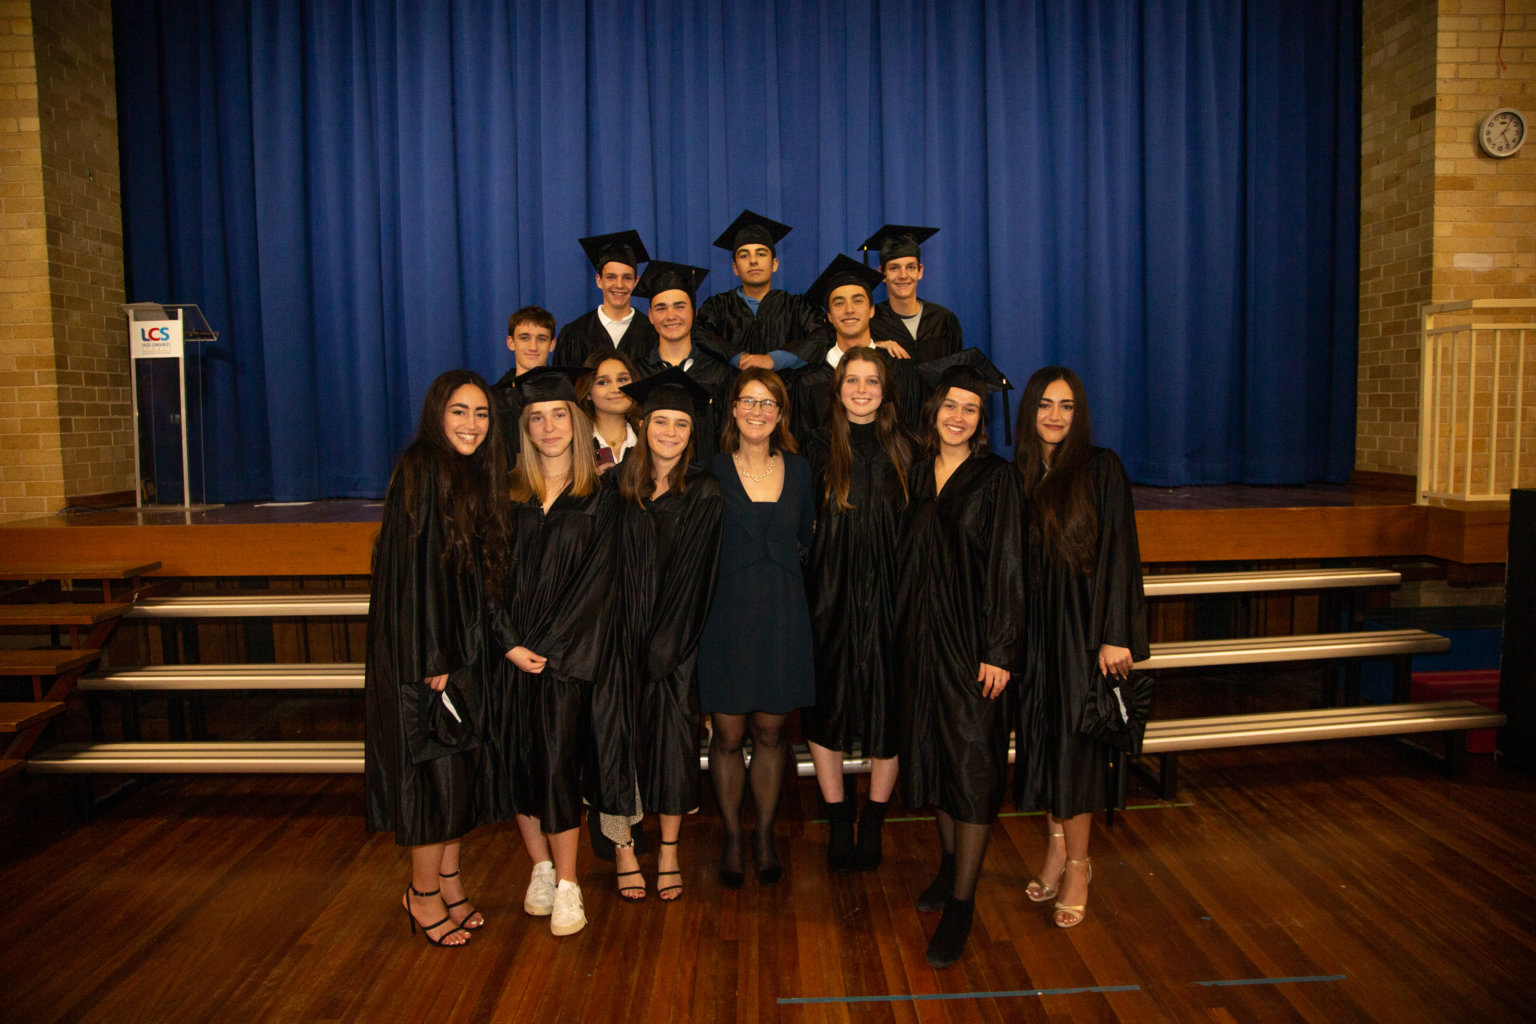 Lycée Condorcet 2021 graduates with French baccalaureate diploma